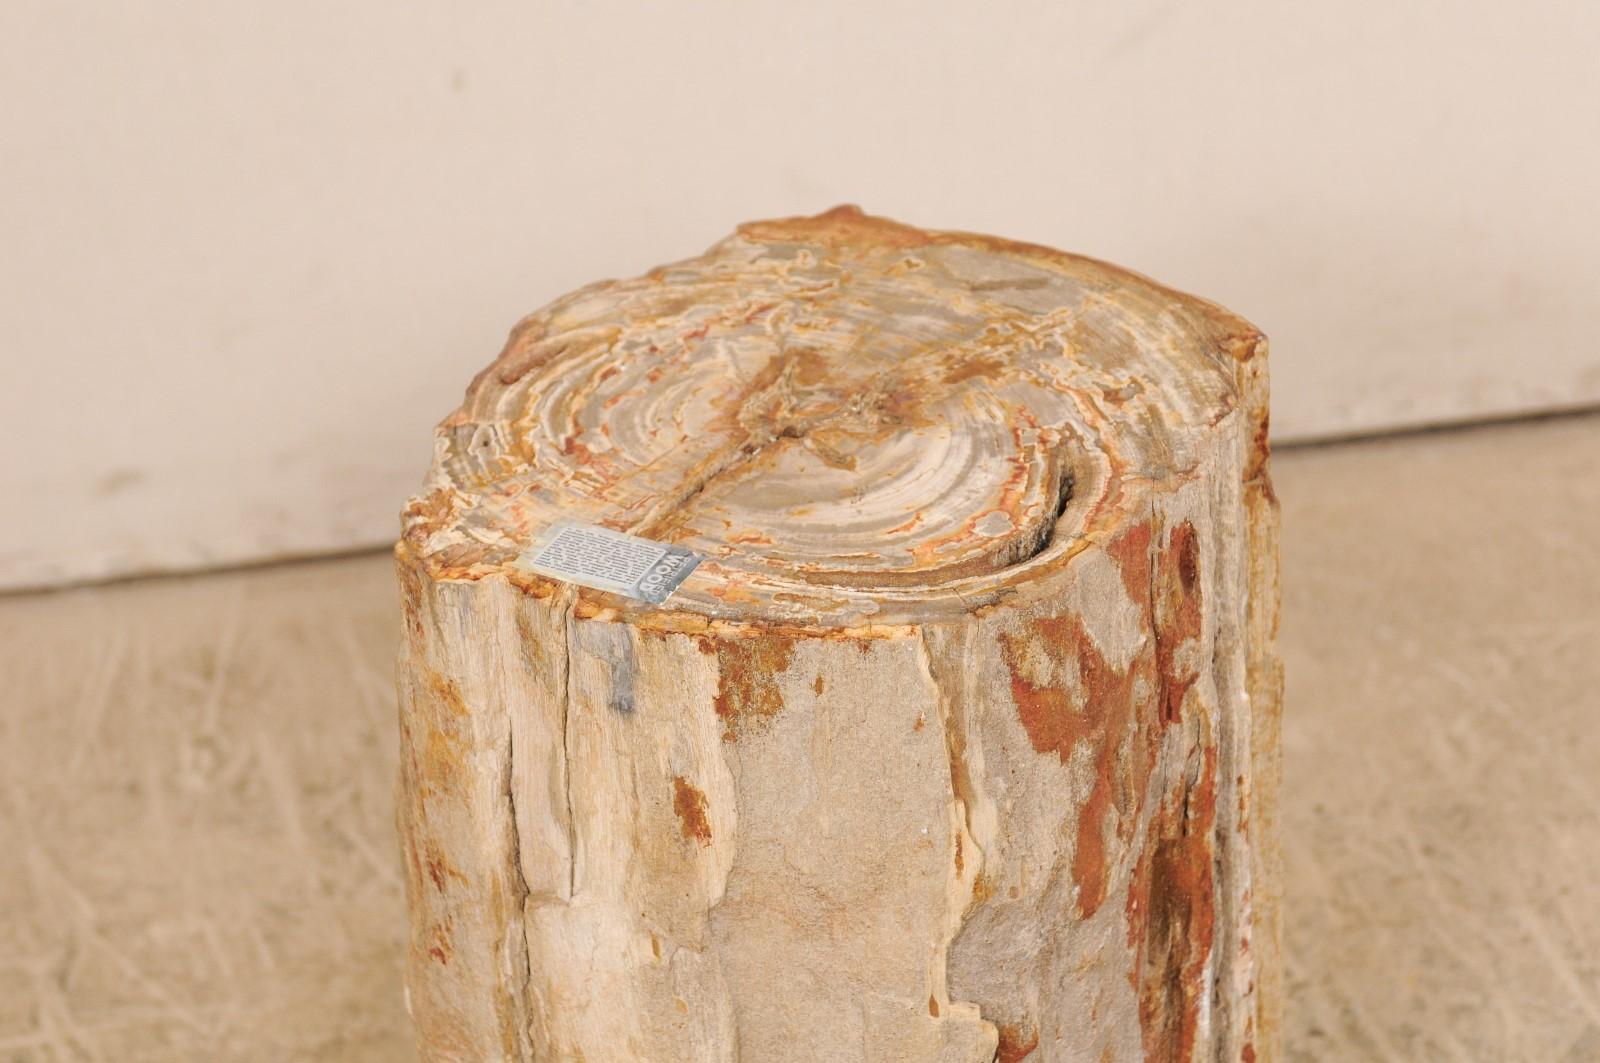 Contemporary Live-Edge Petrified Wood Stool or Small Drinks Table For Sale